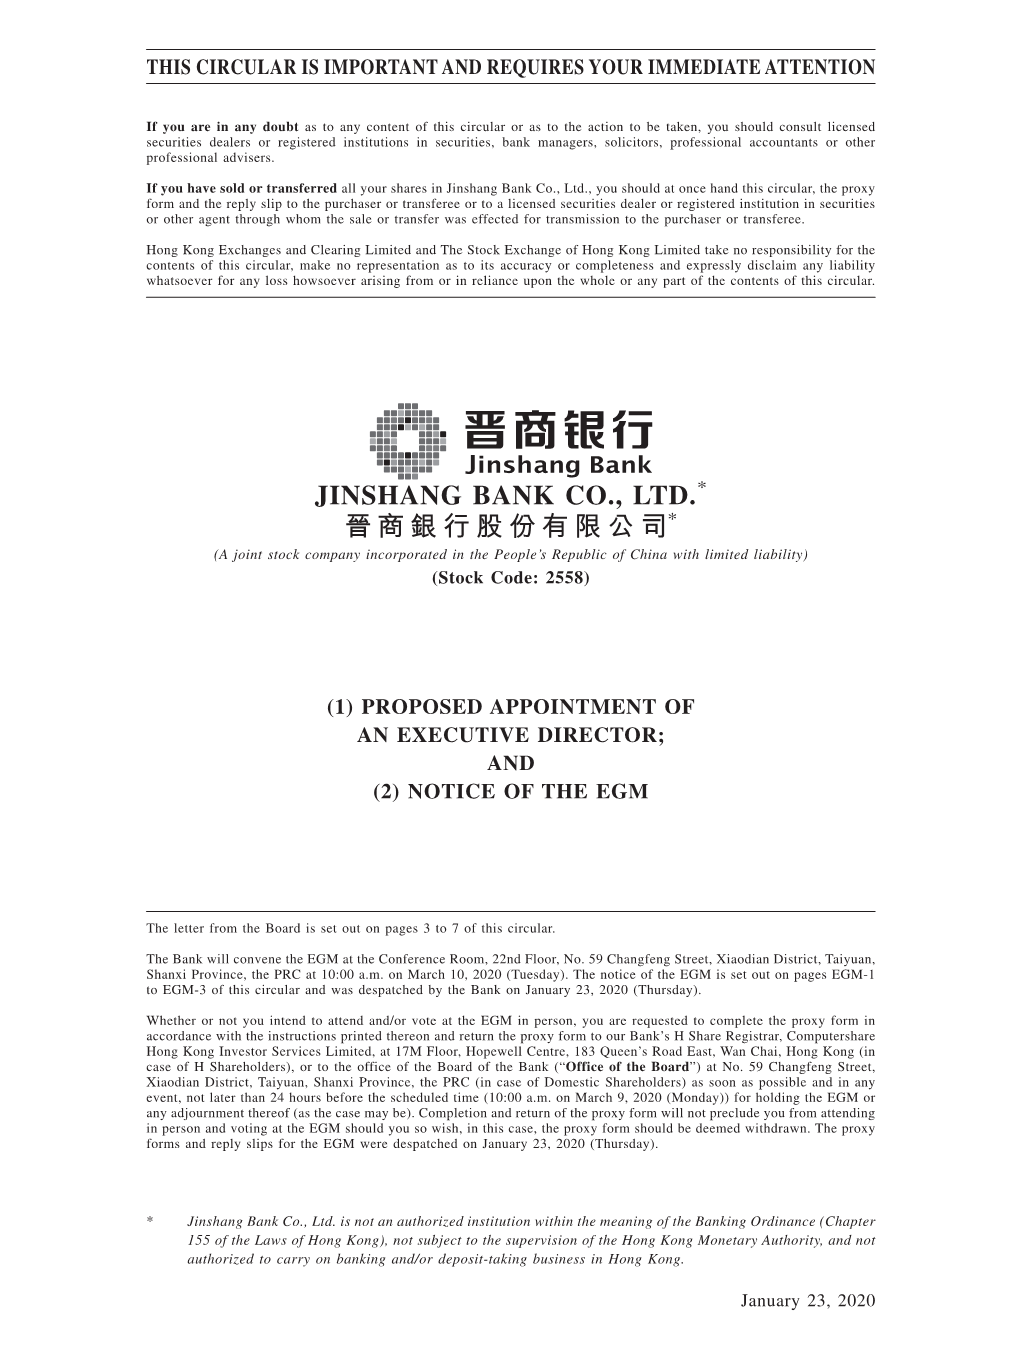 JINSHANG BANK CO., LTD.* 晉商銀行股份有限公司* (A Joint Stock Company Incorporated in the People’S Republic of China with Limited Liability) (Stock Code: 2558)